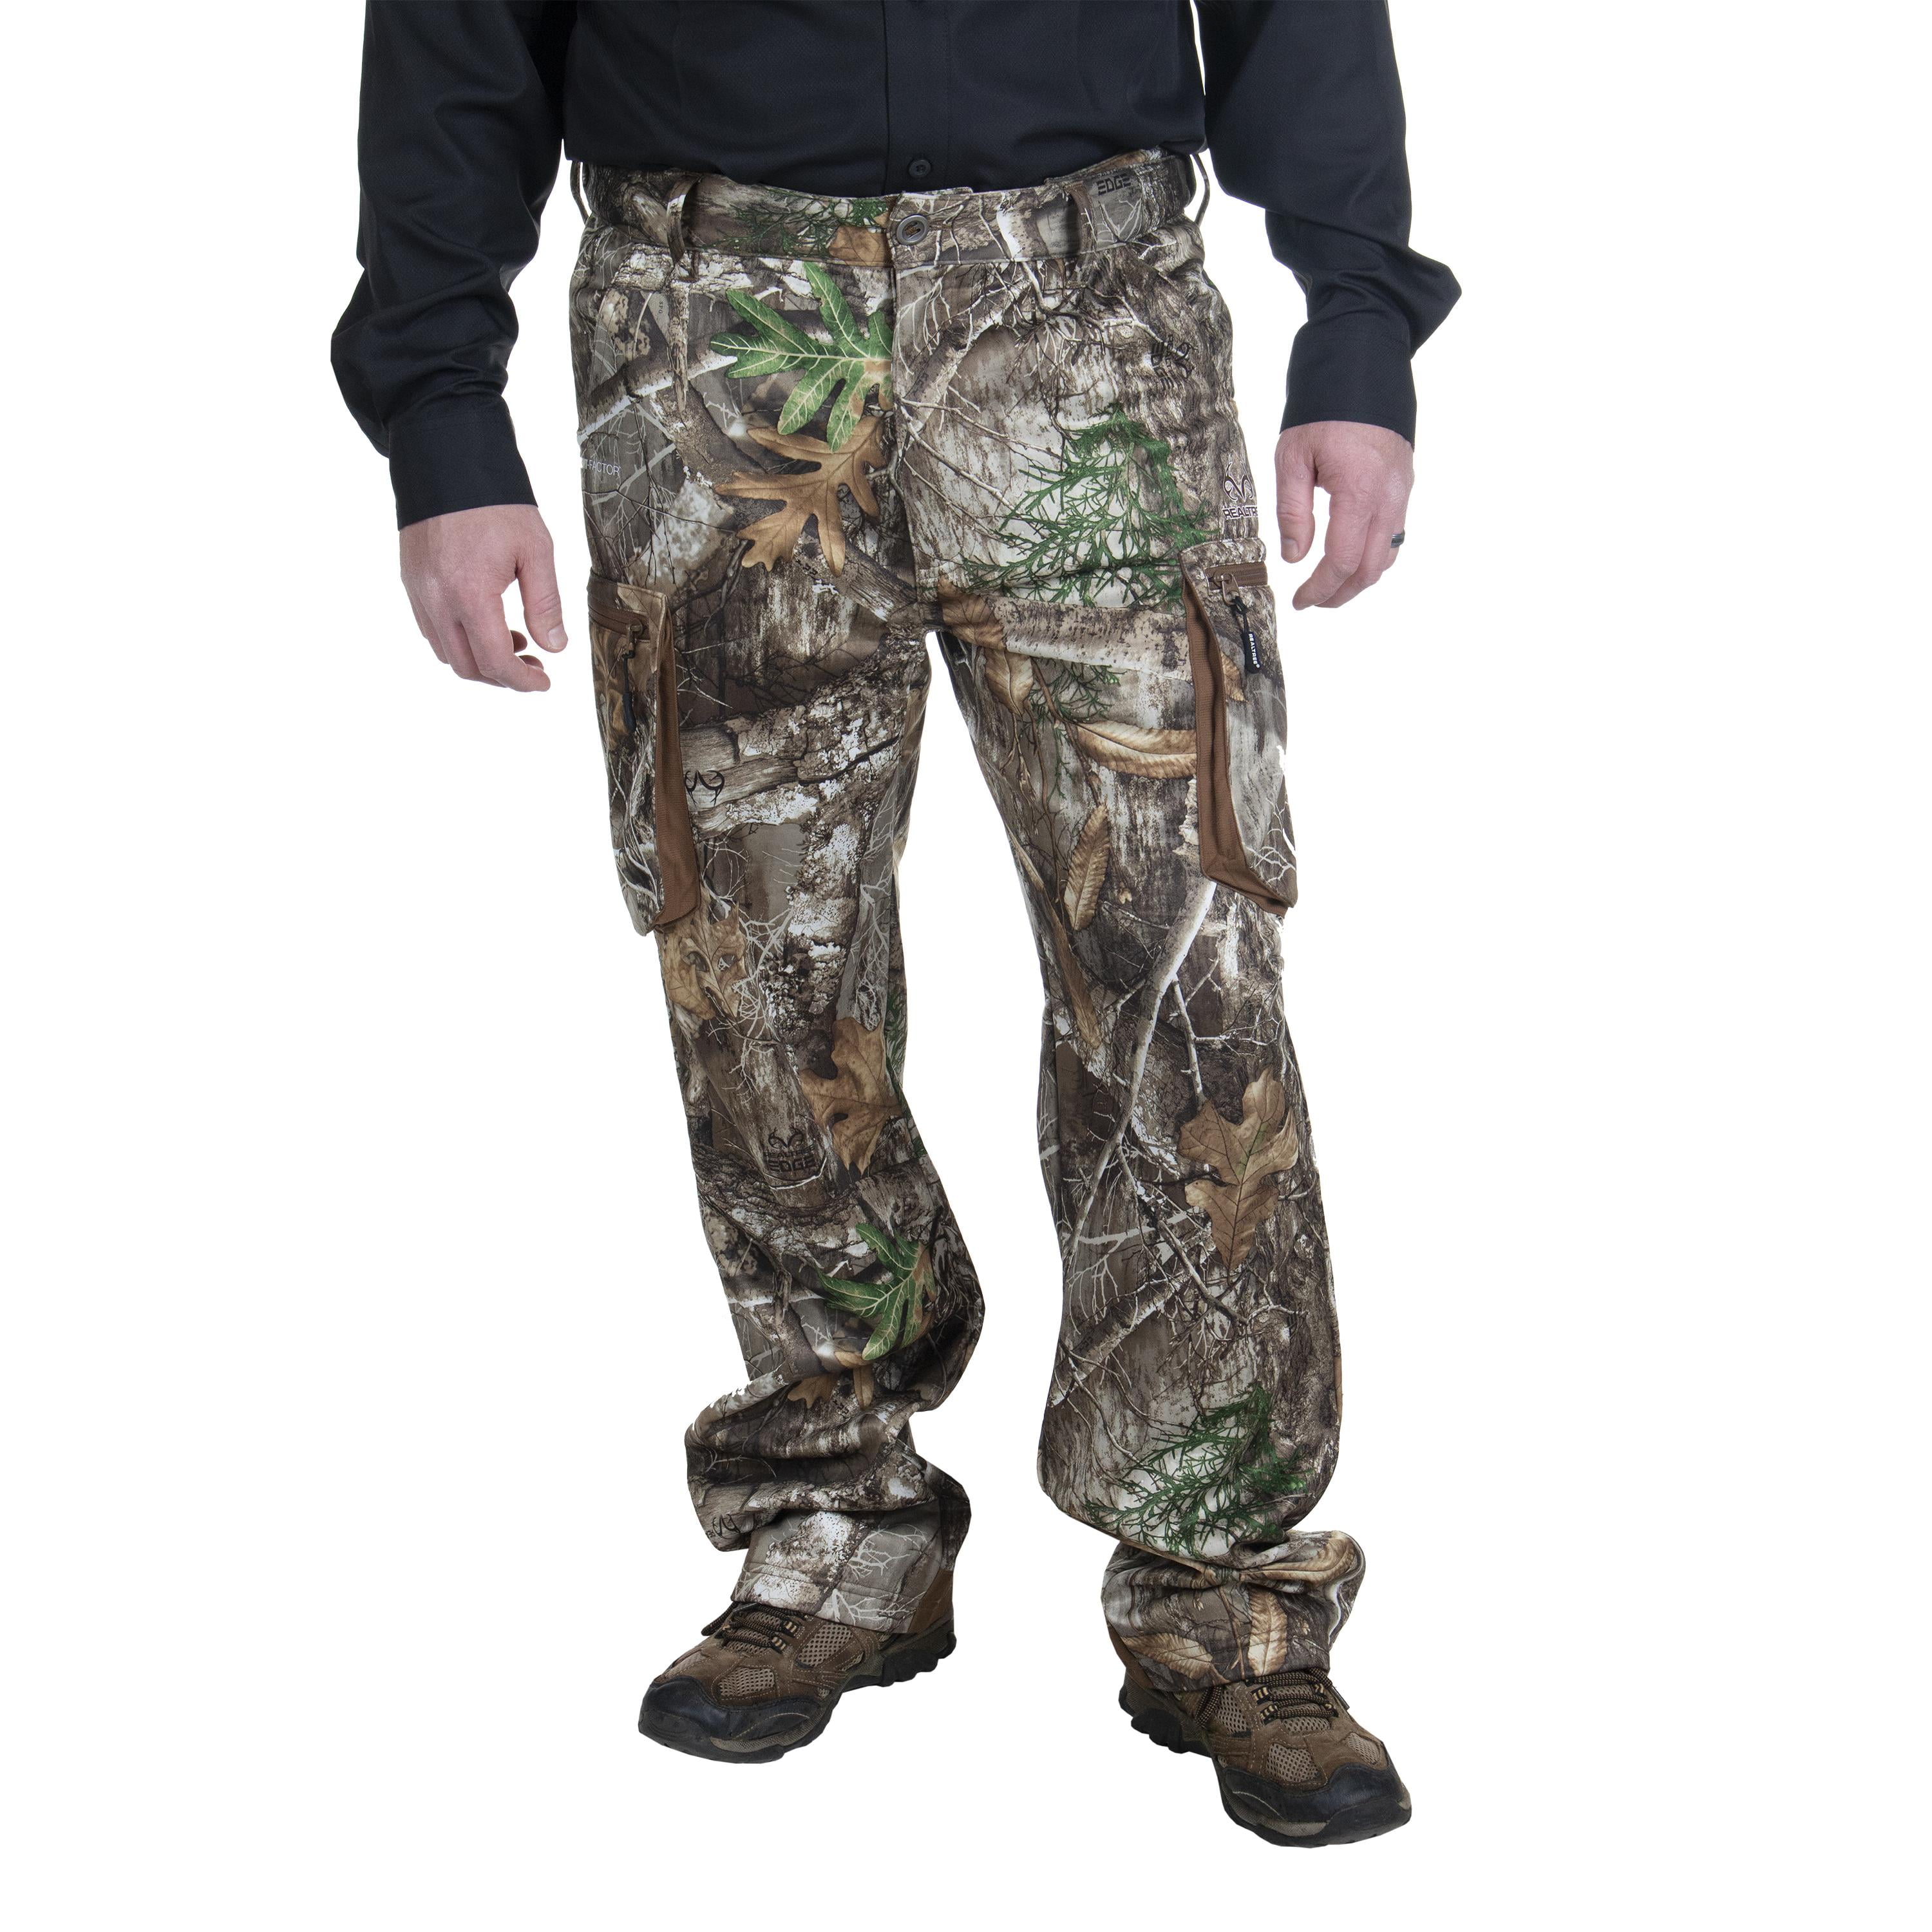 Bionic Camouflage Hunting Pants Big and Tall Warming Fleece Trousers 